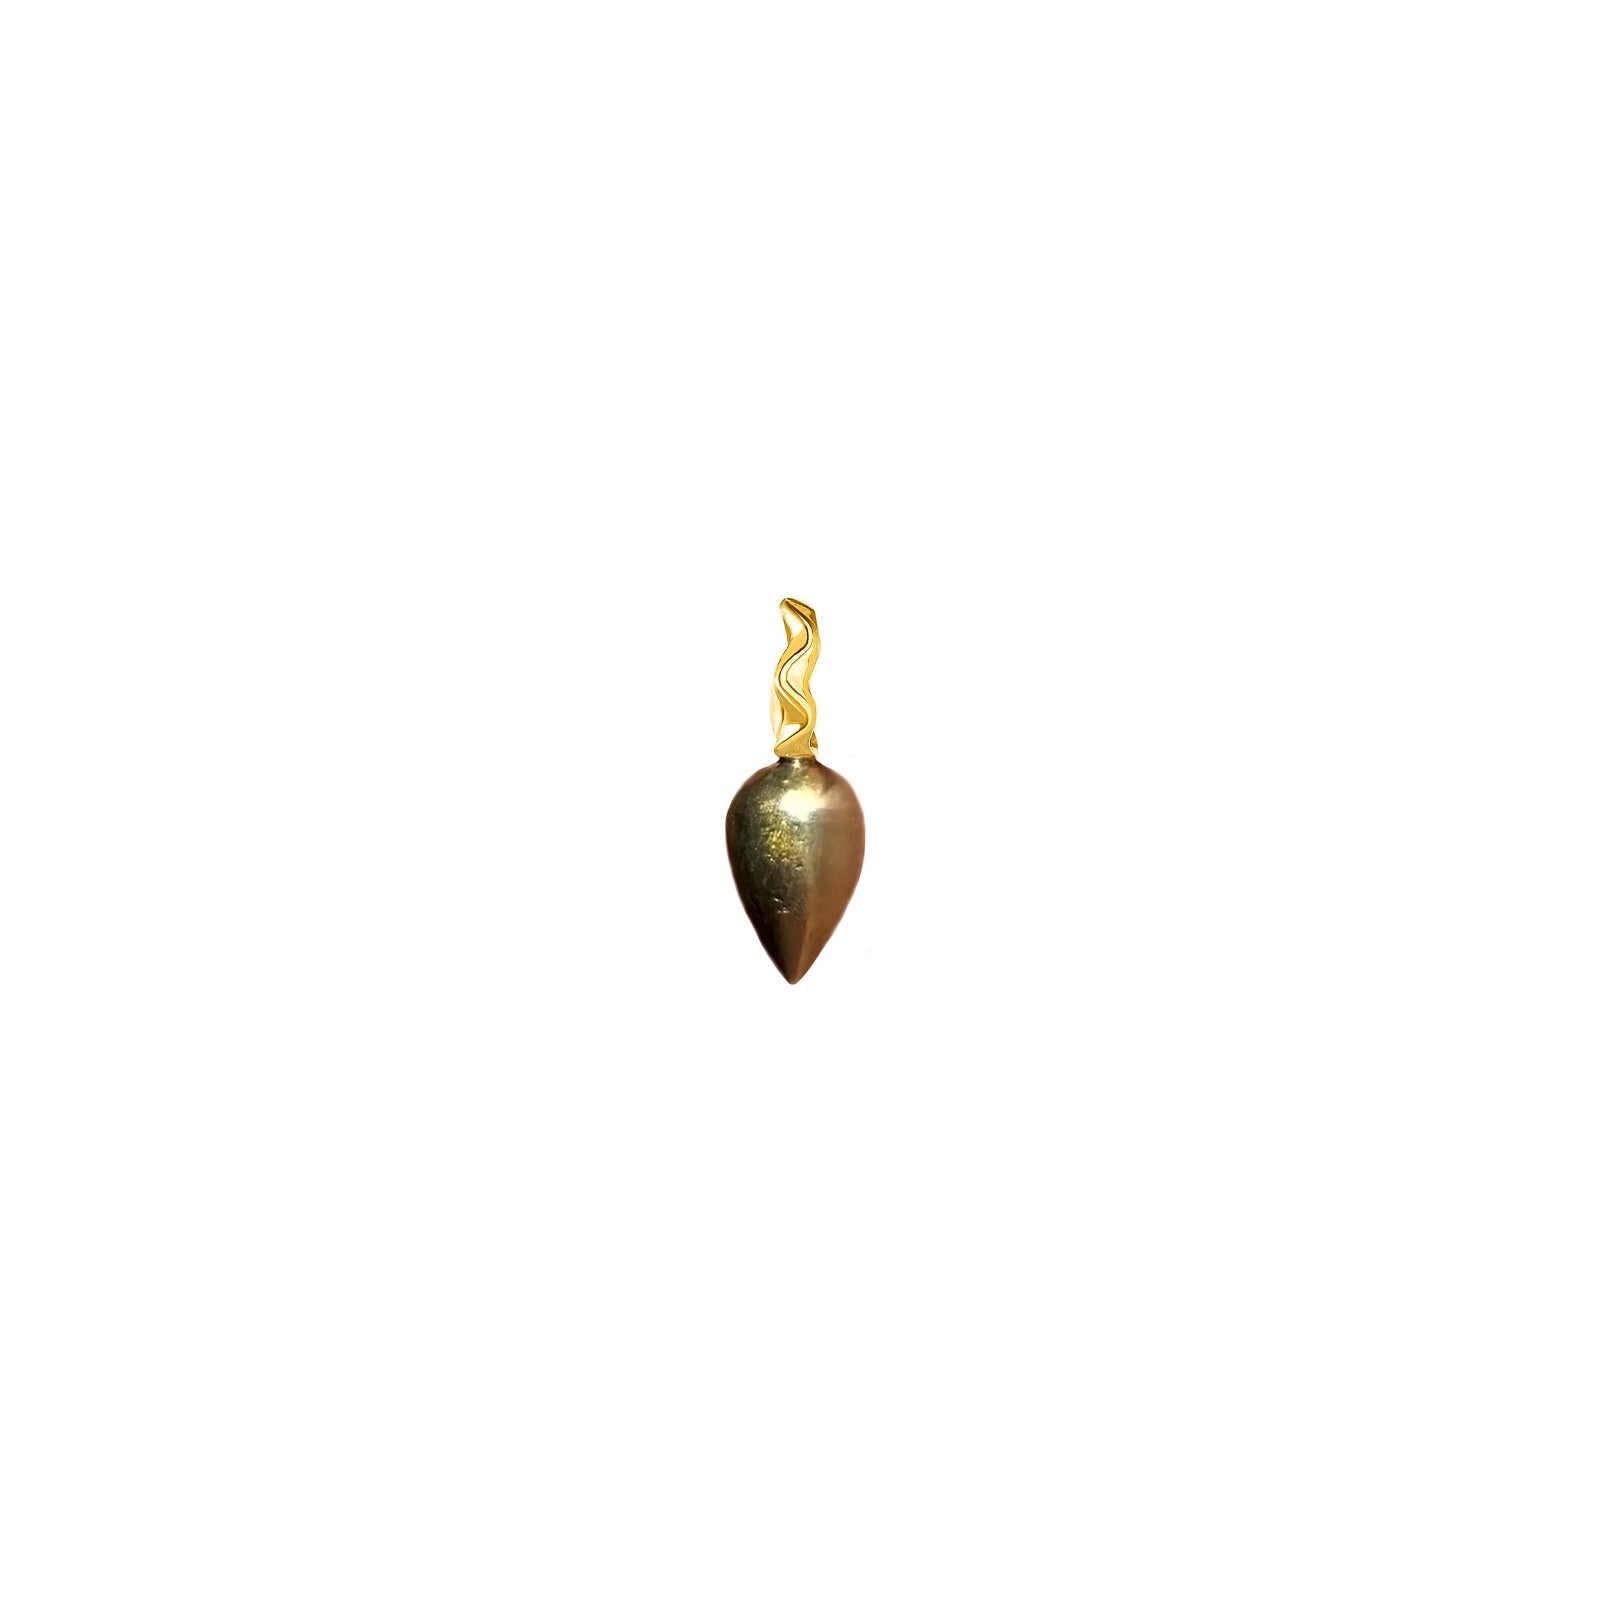 Pyrite acorn drop charm with 14k gold bail